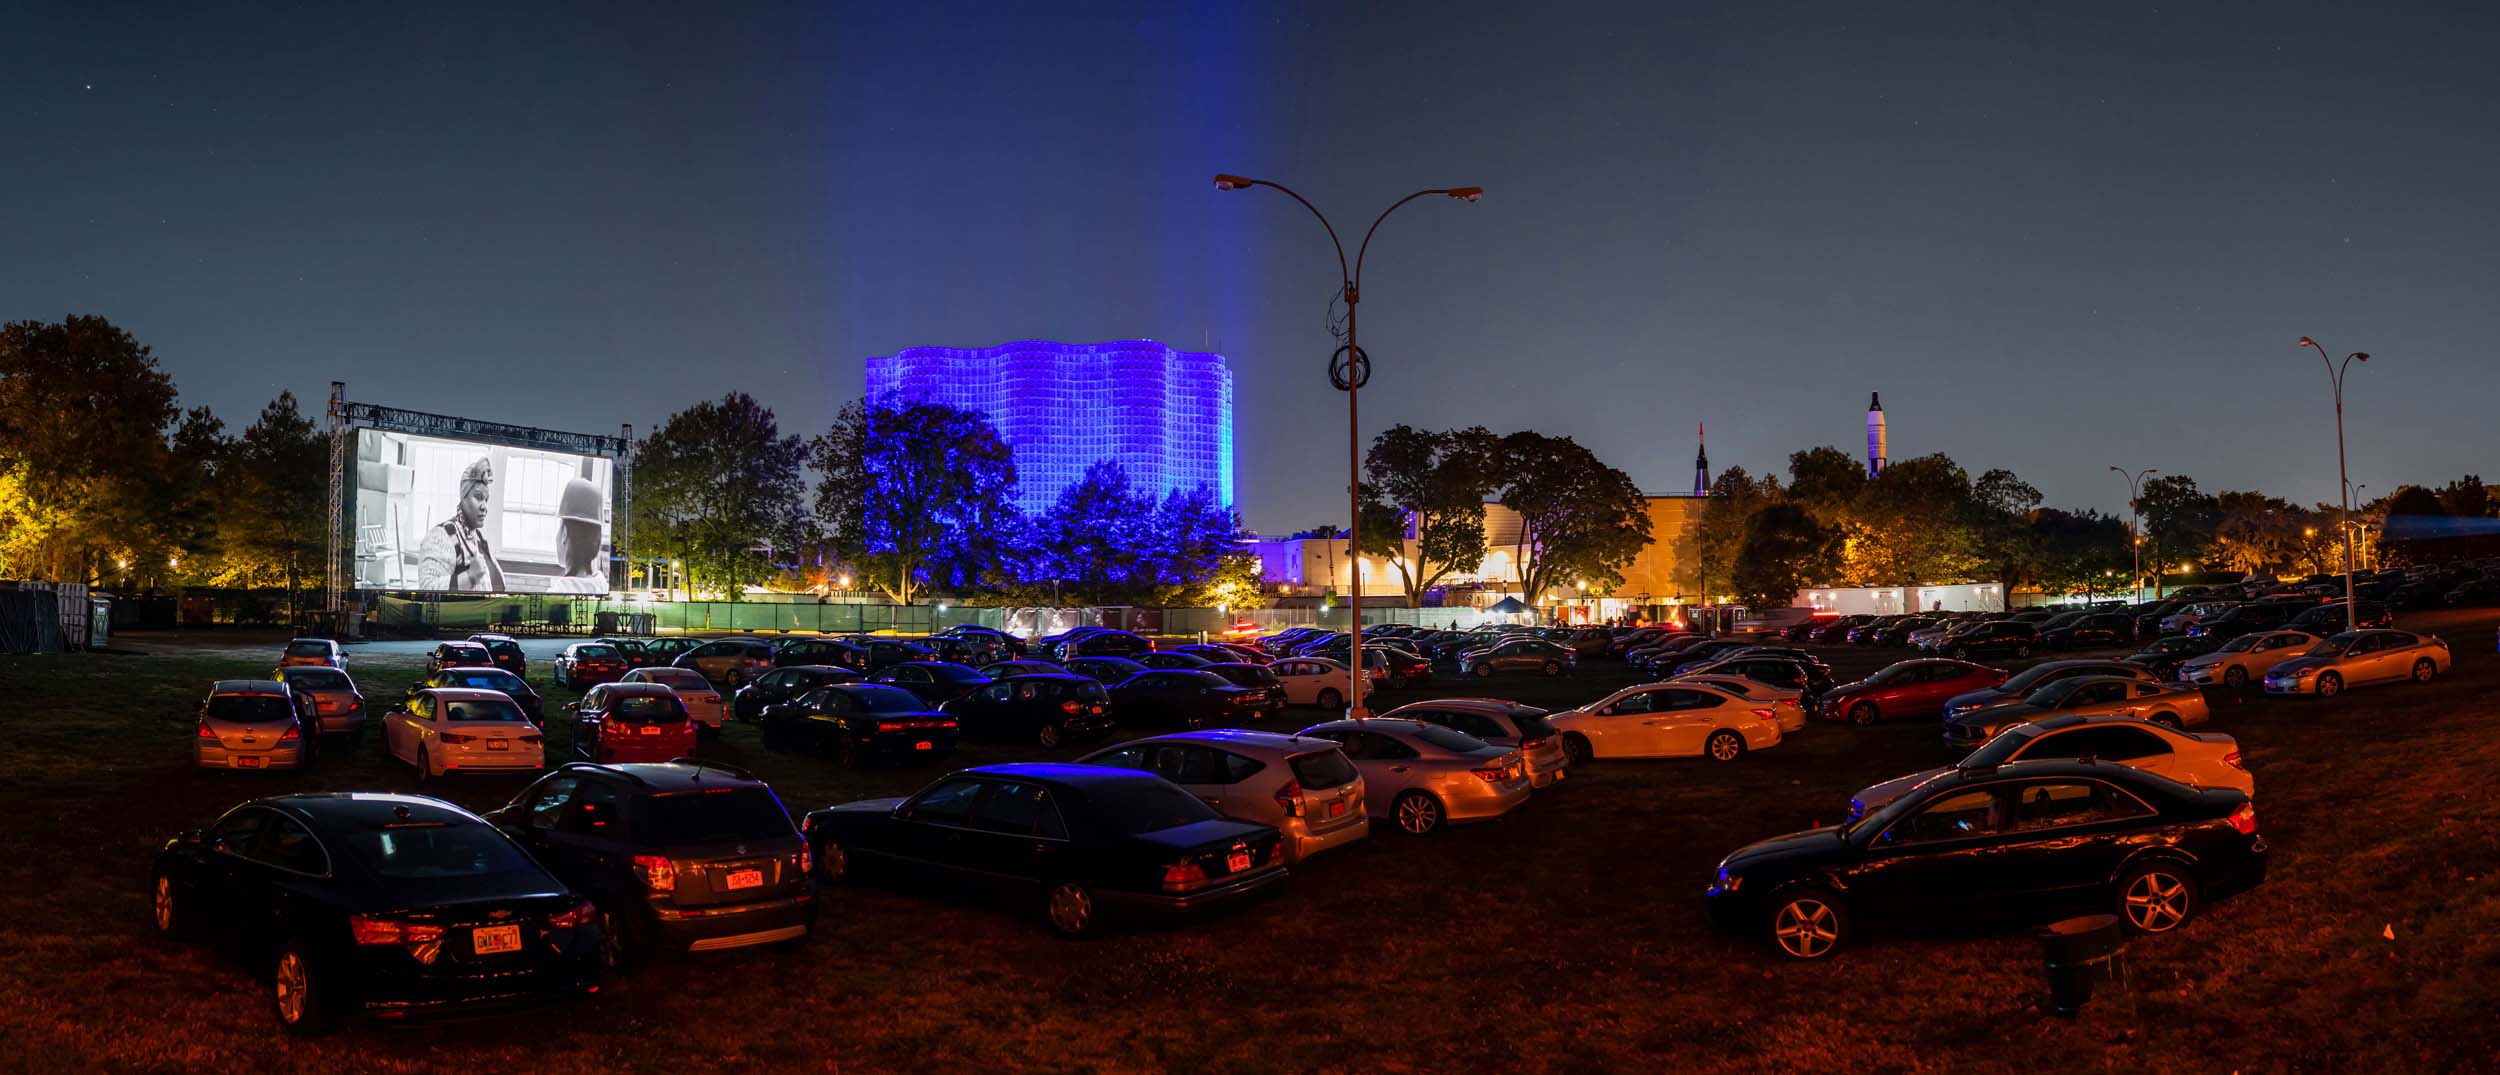 A drive-in screening at New York Hall of Science’s parking lot, which was converted to a screening venue by Rooftop Films. Photo by Maike Schulz. Courtesy of Rooftop Films.